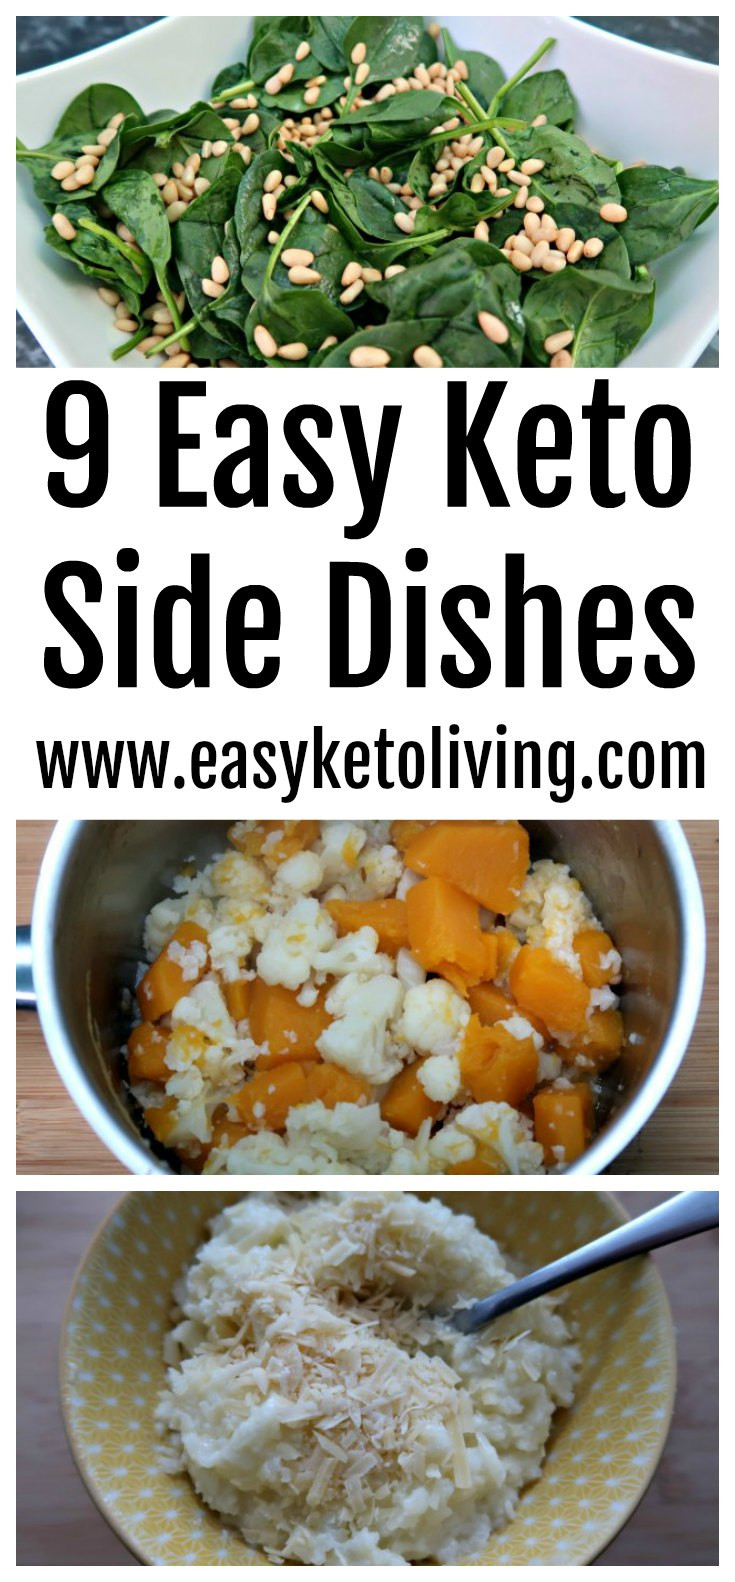 Easy Keto Sides
 9 Easy Keto Sides Recipes Low Carb Side Dishes